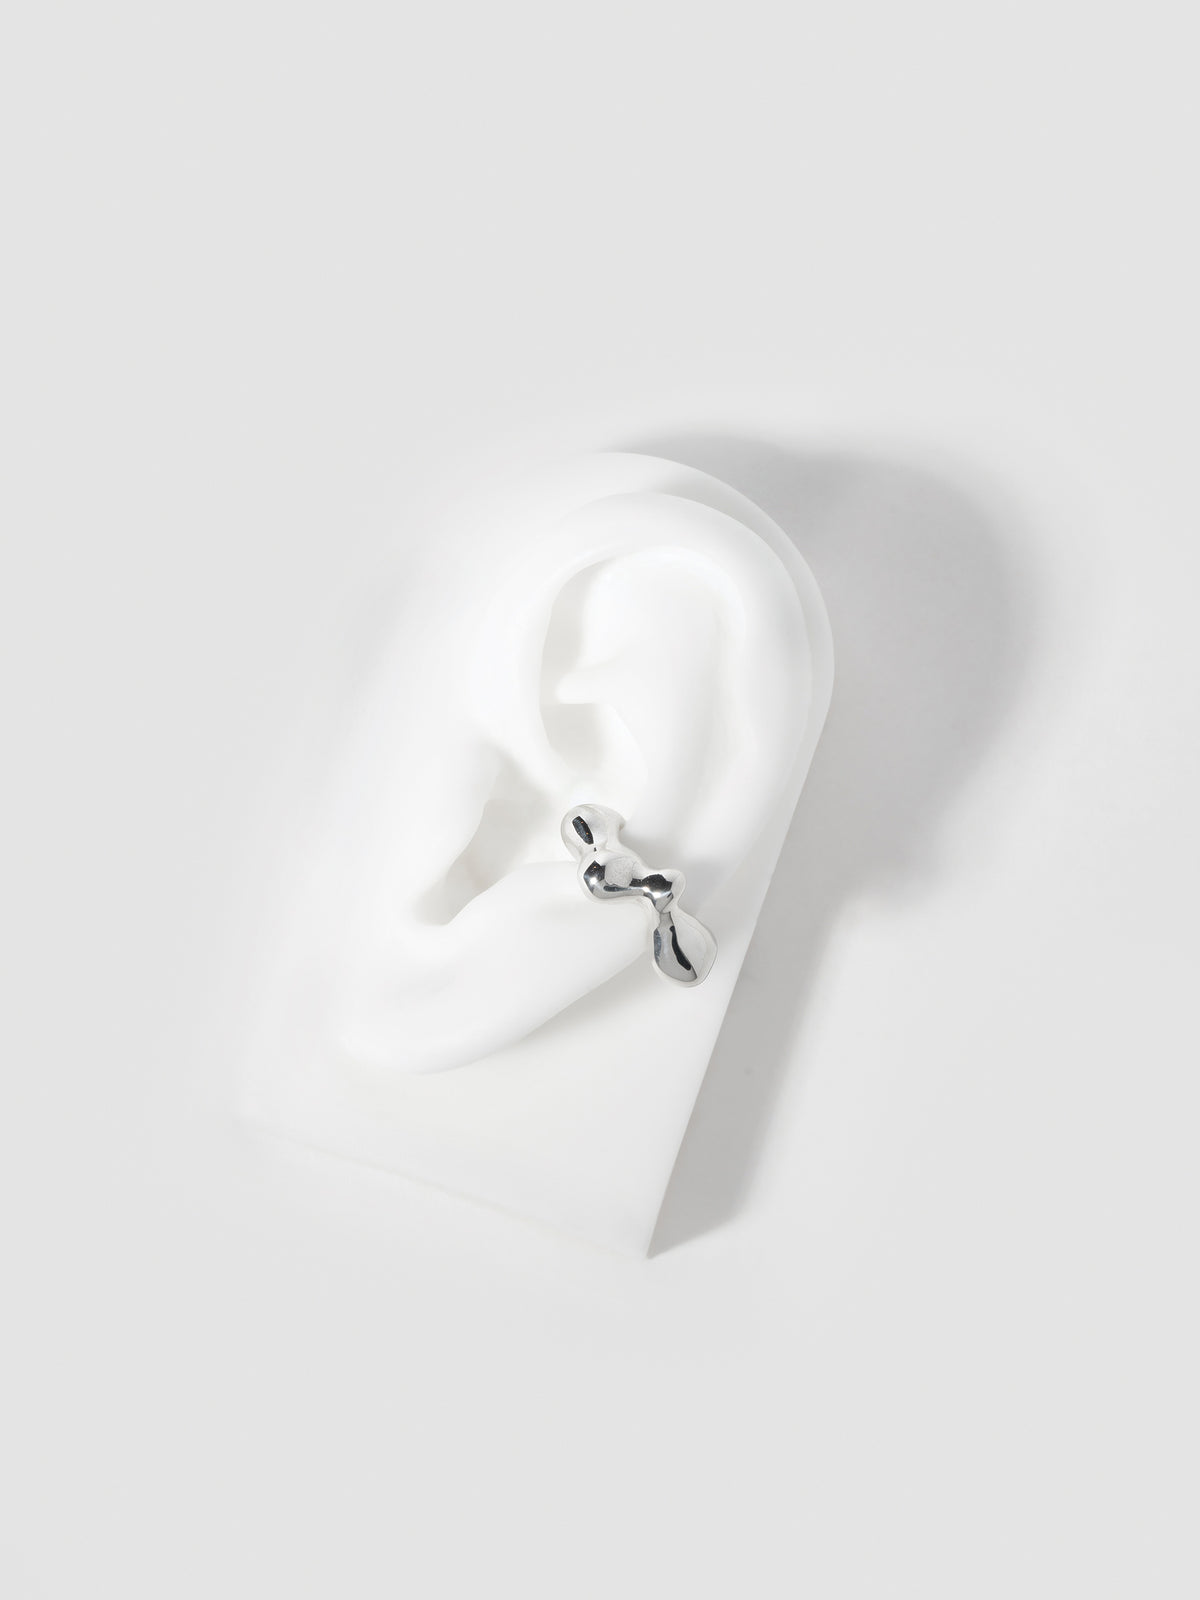 Product image of FARIS SEEP Ear Cuff in sterling silver shown on silicone ear